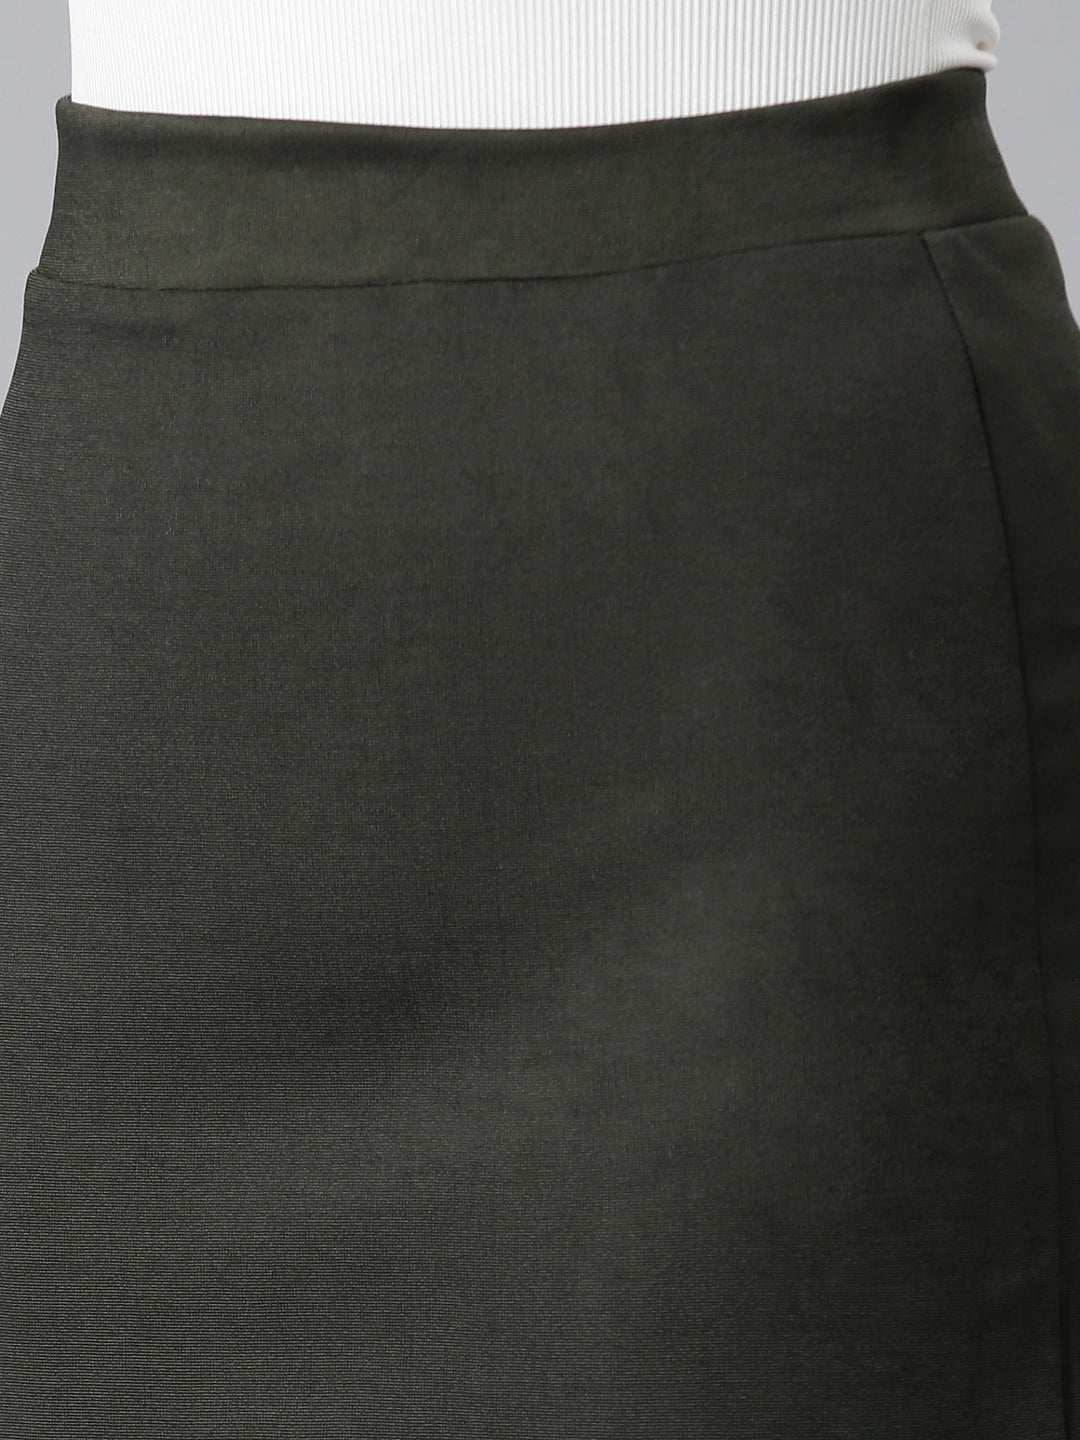 Women Olive Solid Pencil Skirt